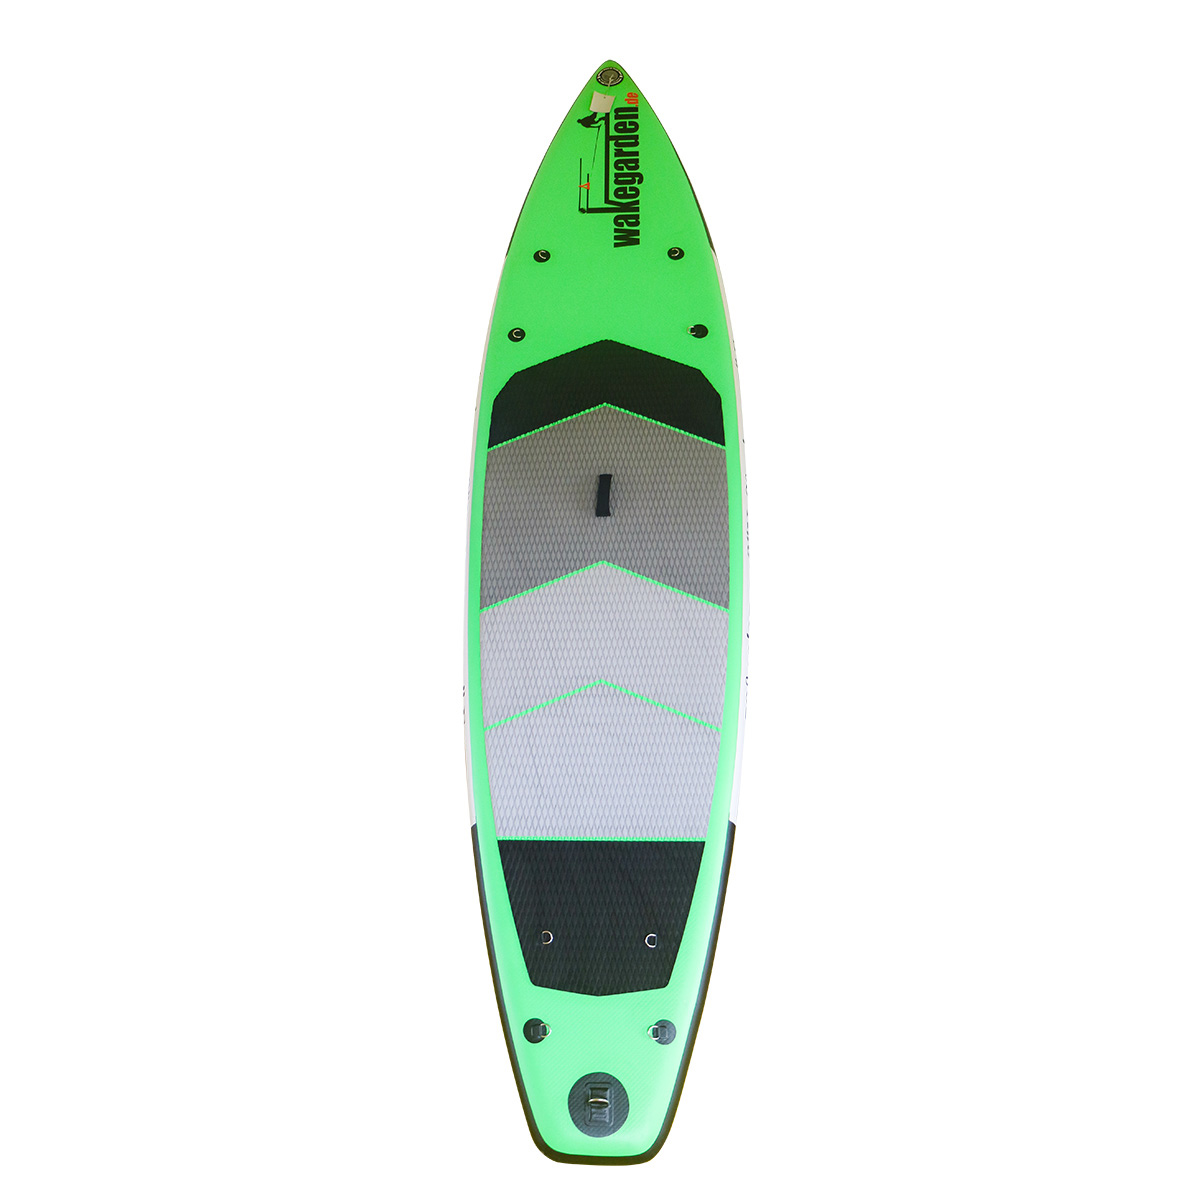 Green Inflatable Paddle BoardYPD-036